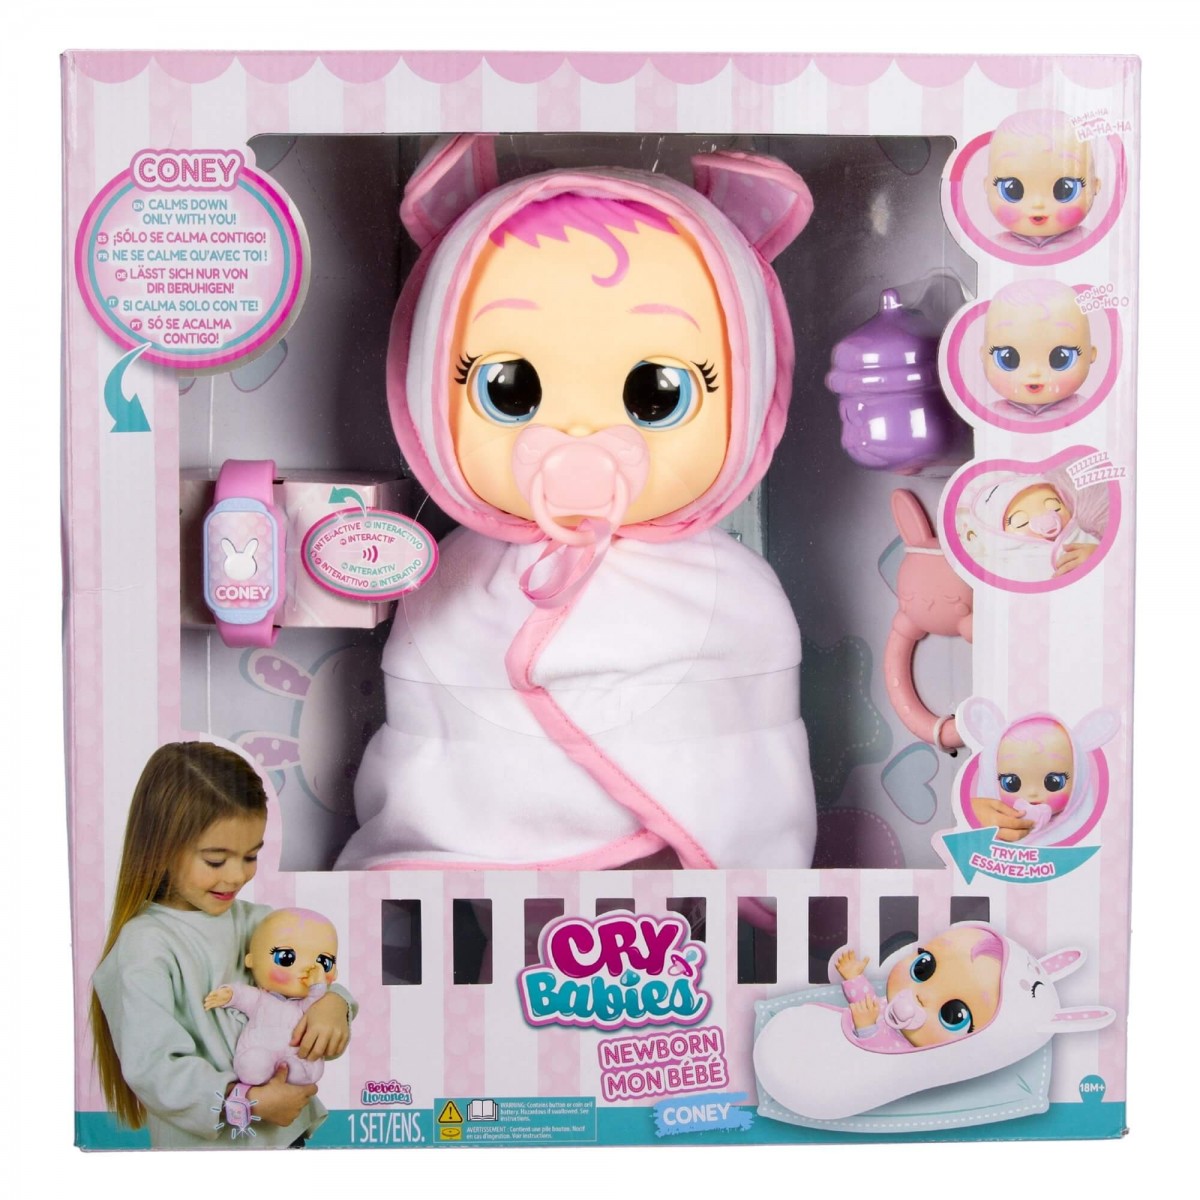 Cry Babies Newborn Coney Doll at Toys R Us UK